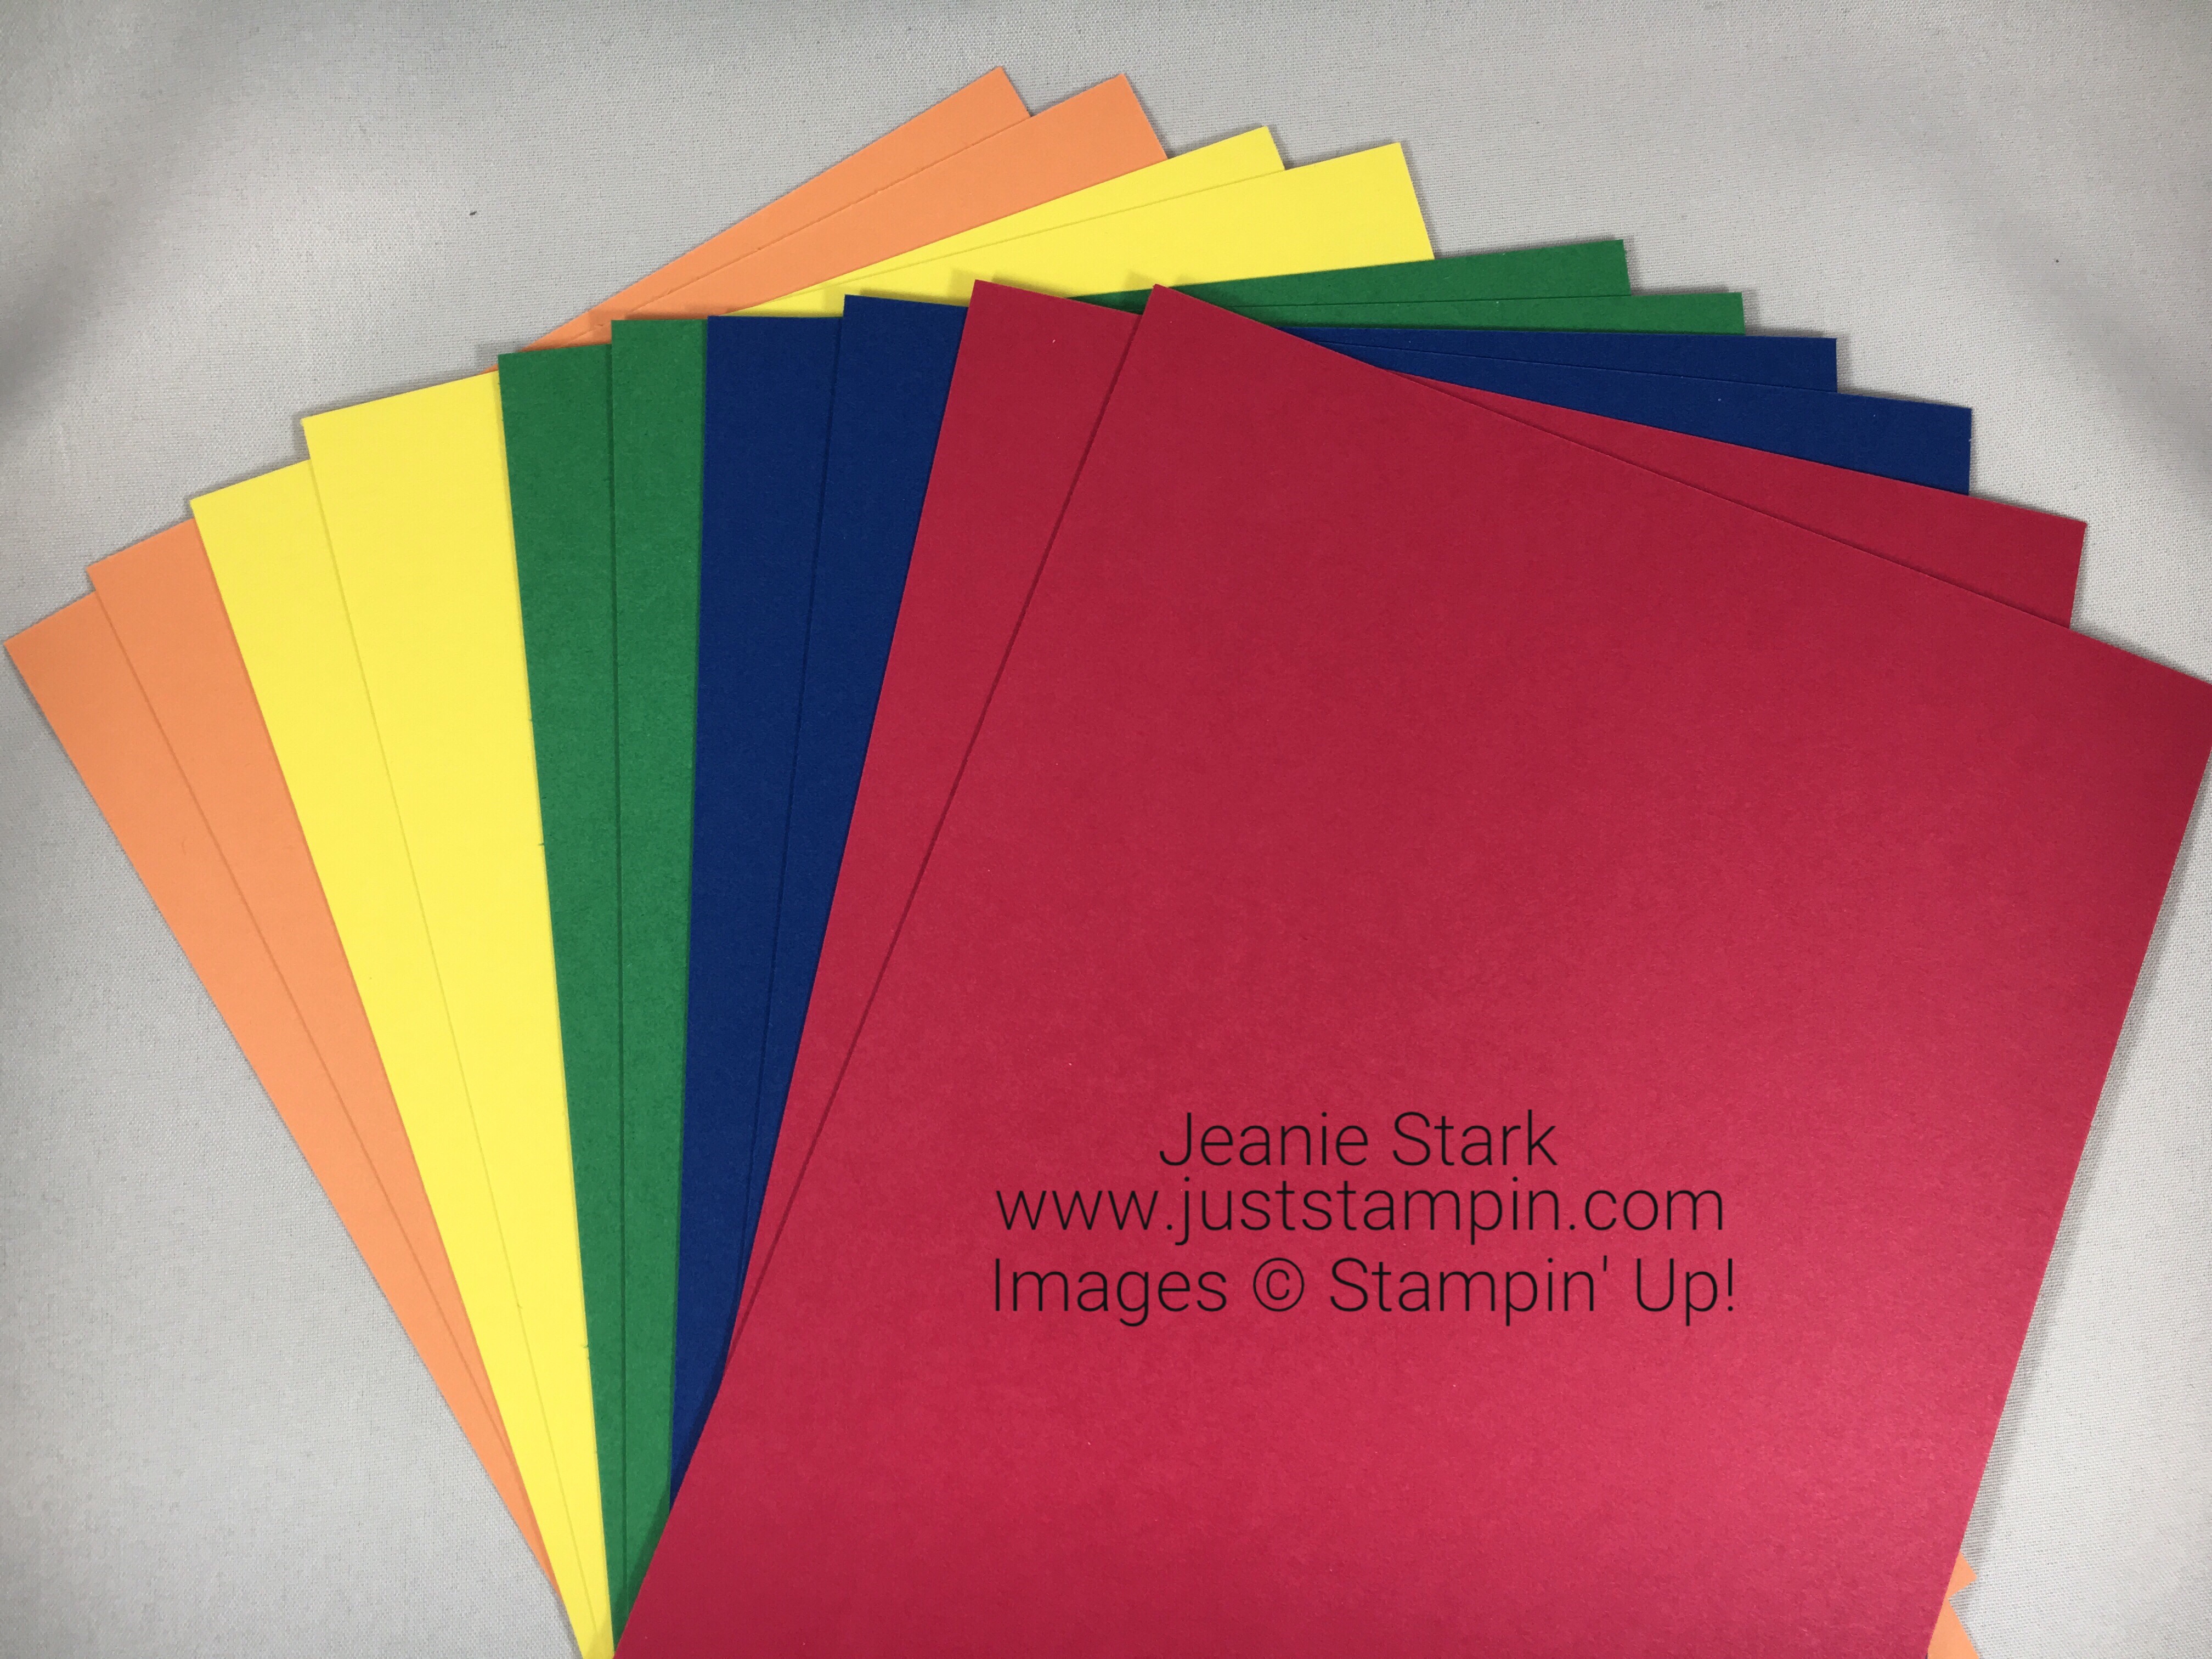 Stampin Up 2018-2020 In Colors - FREE cardstock with purchase of the In Color bundle from my online store in May! Visit www.juststampin.com Jeanie Stark StampinUp